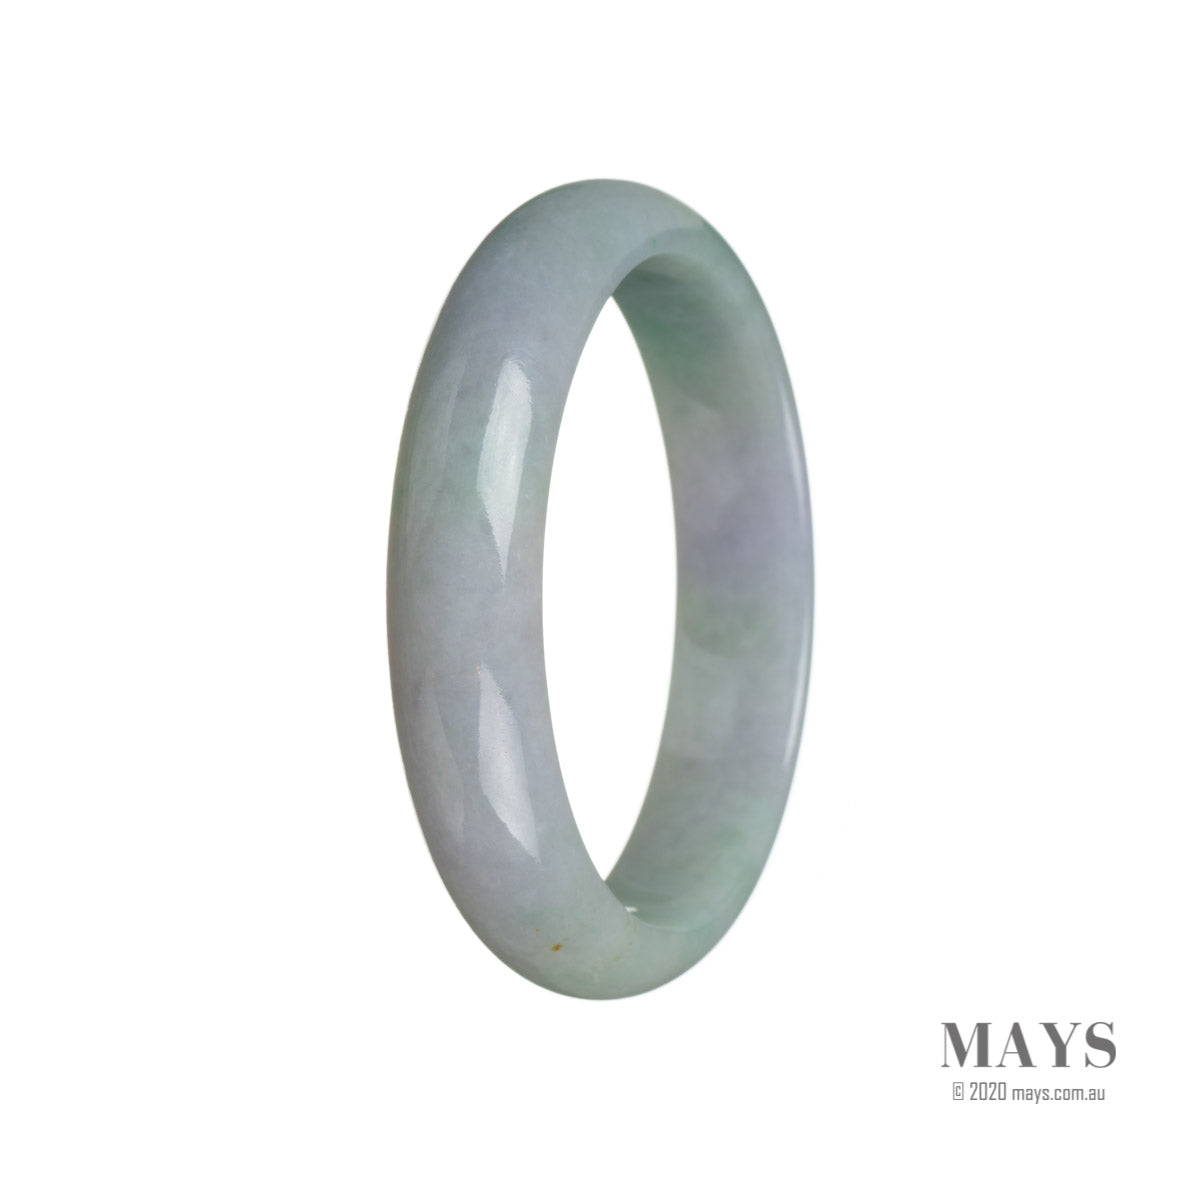 A half moon-shaped jade bangle bracelet in genuine, untreated green with lavender tones, showcasing traditional craftsmanship.